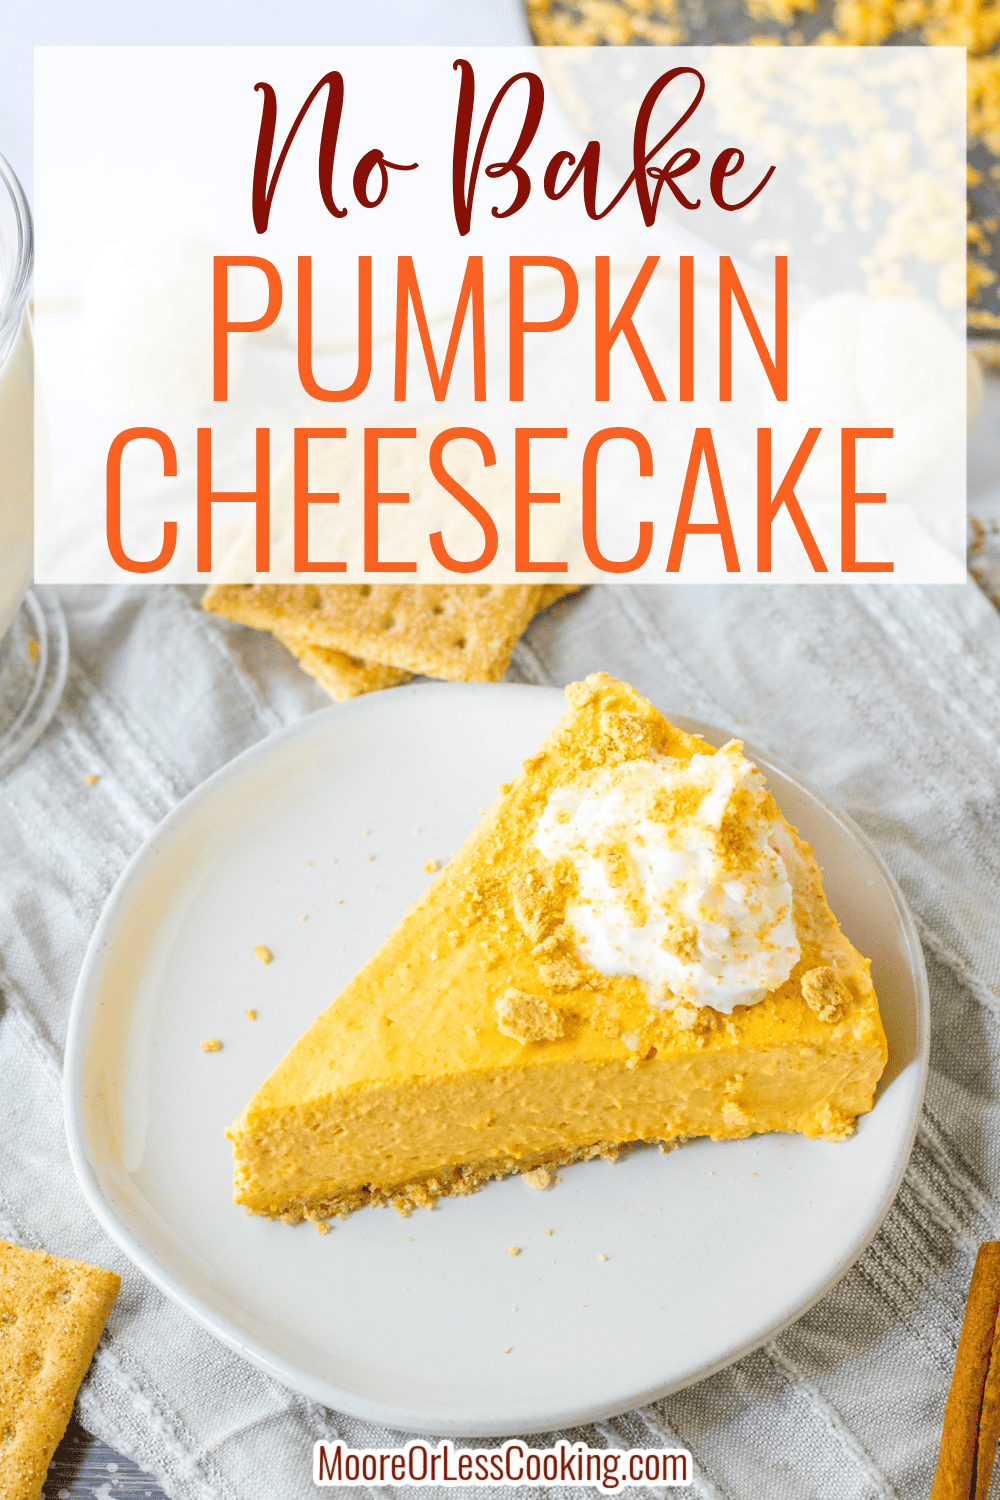 If you love cheesecake and you love pumpkin pie, you'll want to make this No Bake Pumpkin Cheesecake that gives you the best of both desserts! The creamy and smooth pumpkin spice filling takes just minutes to make before taking its place in a graham cracker crust. It's the perfect effortless Thanksgiving dessert that's always a crowd pleaser. via @Mooreorlesscook